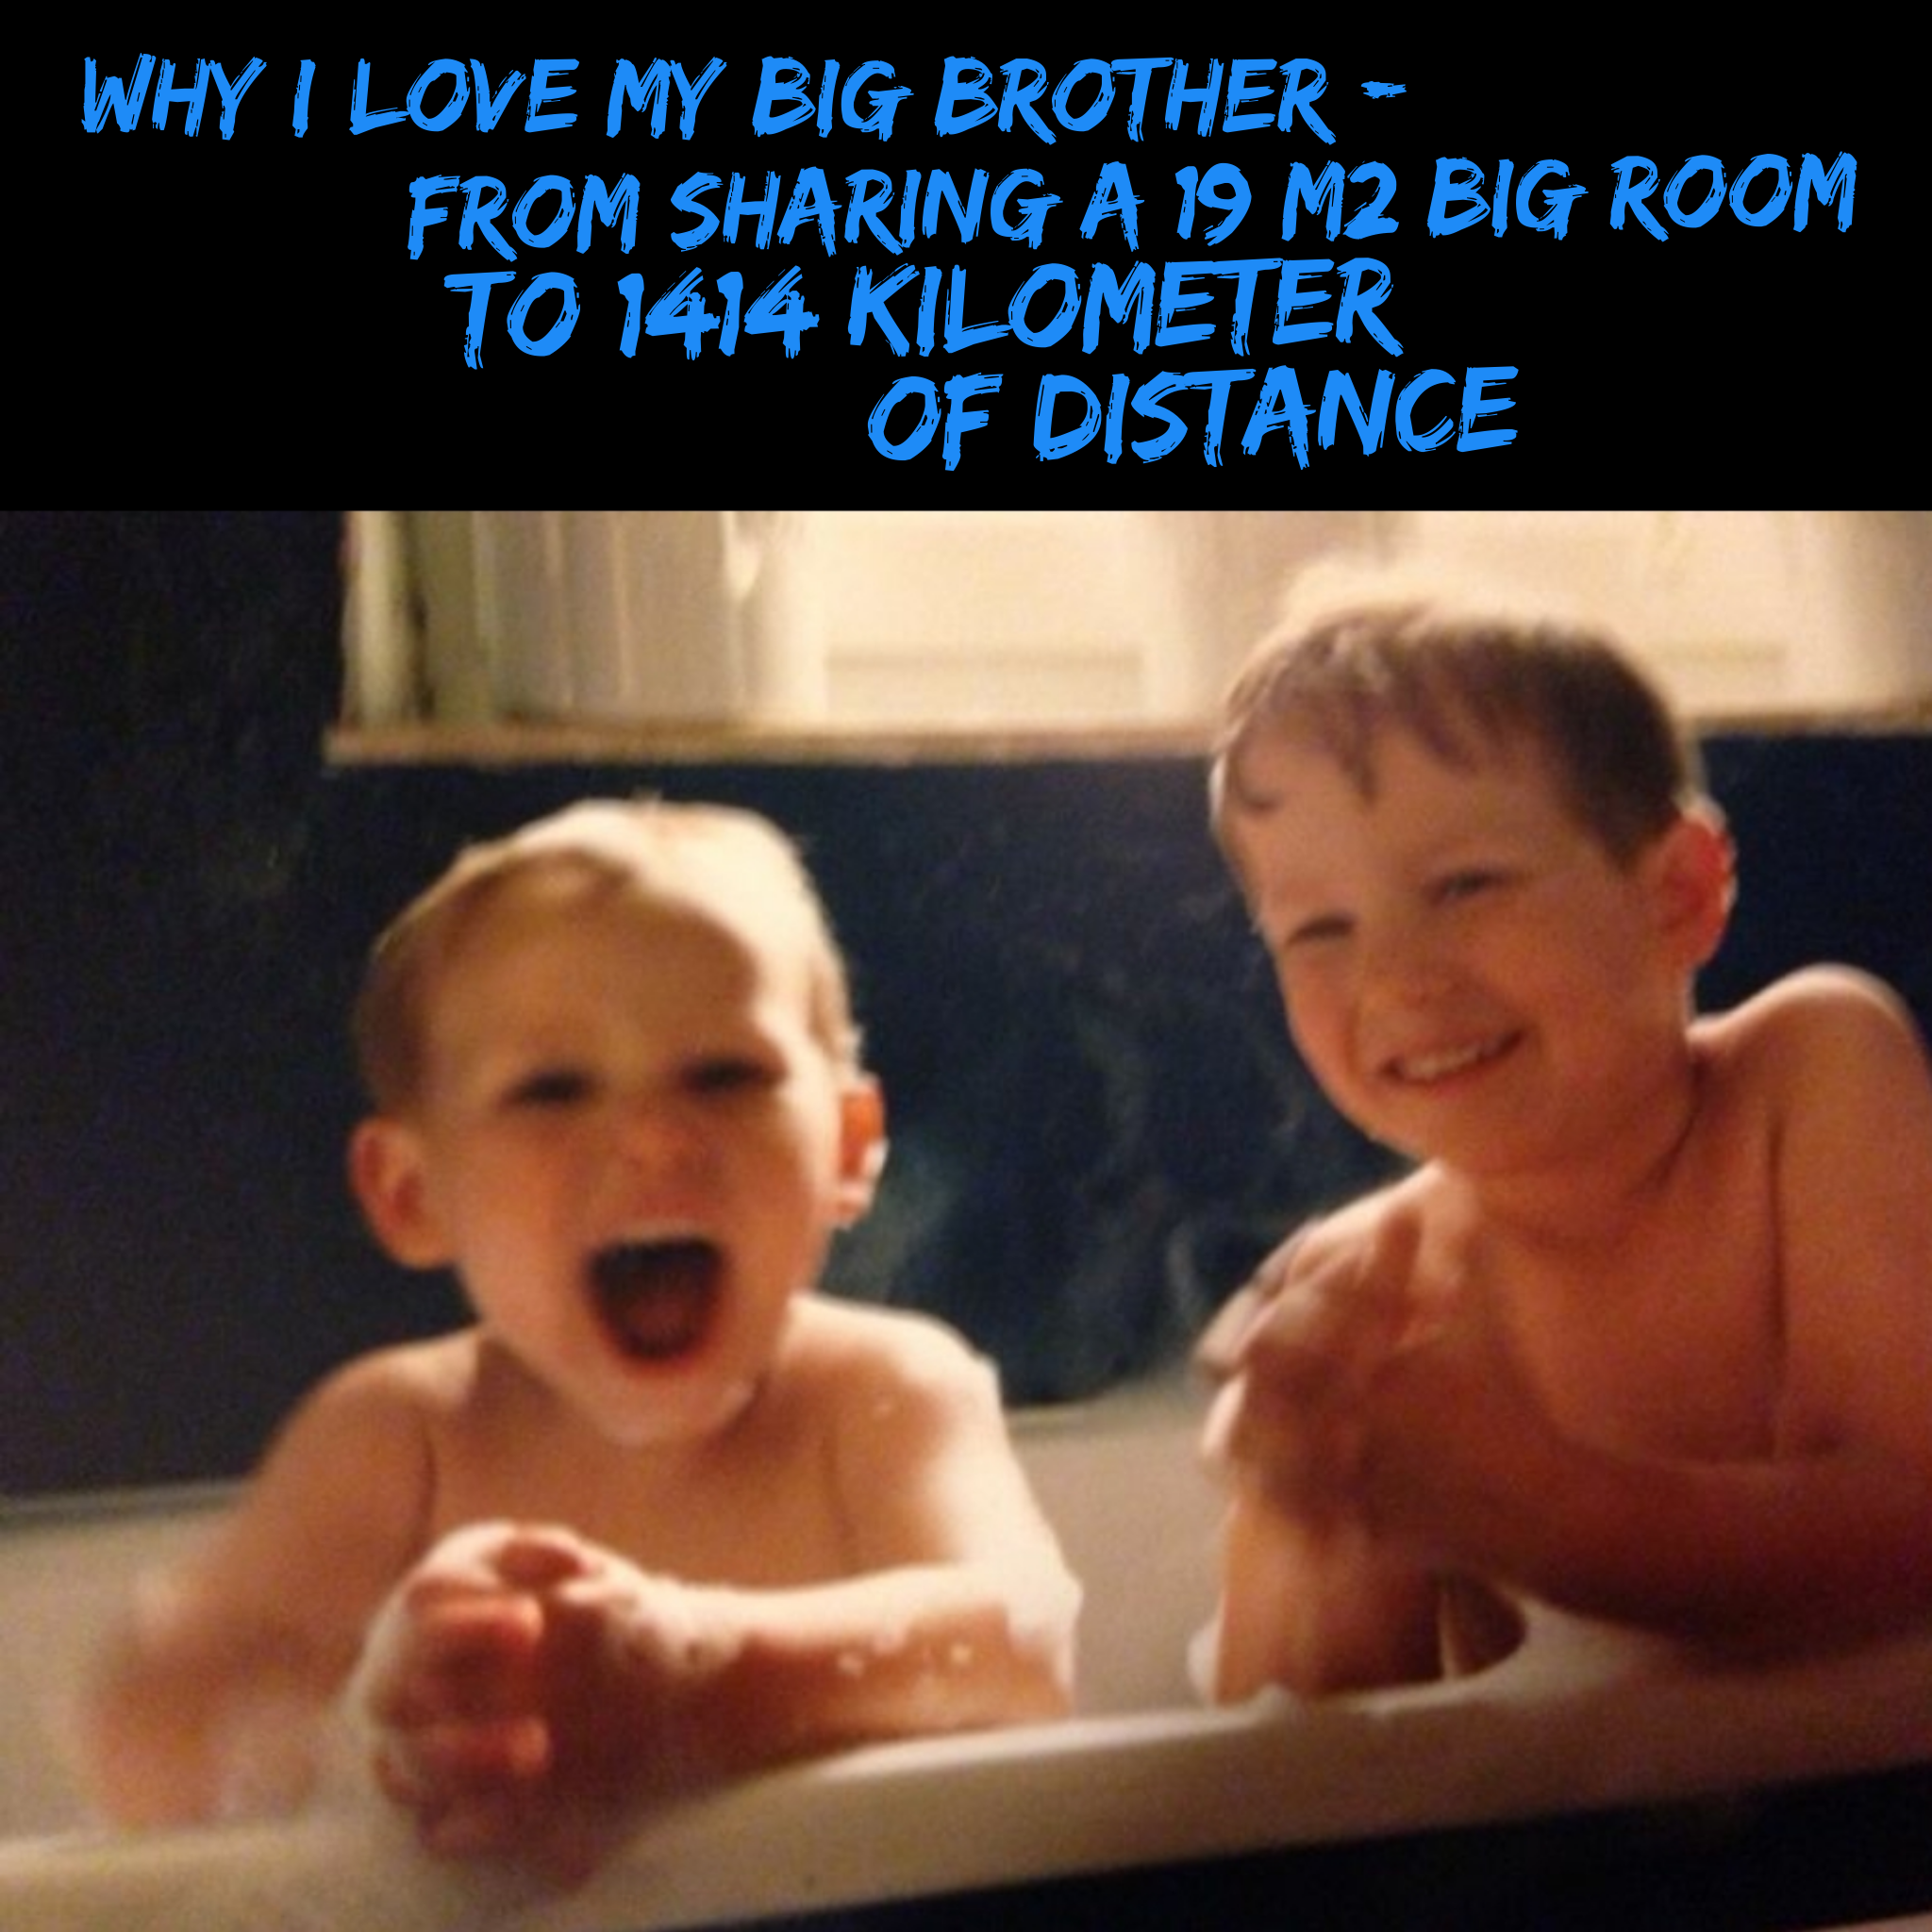 Why I love my big brother – From sharing a 19 m2 big room to 1414 kilometers of distance